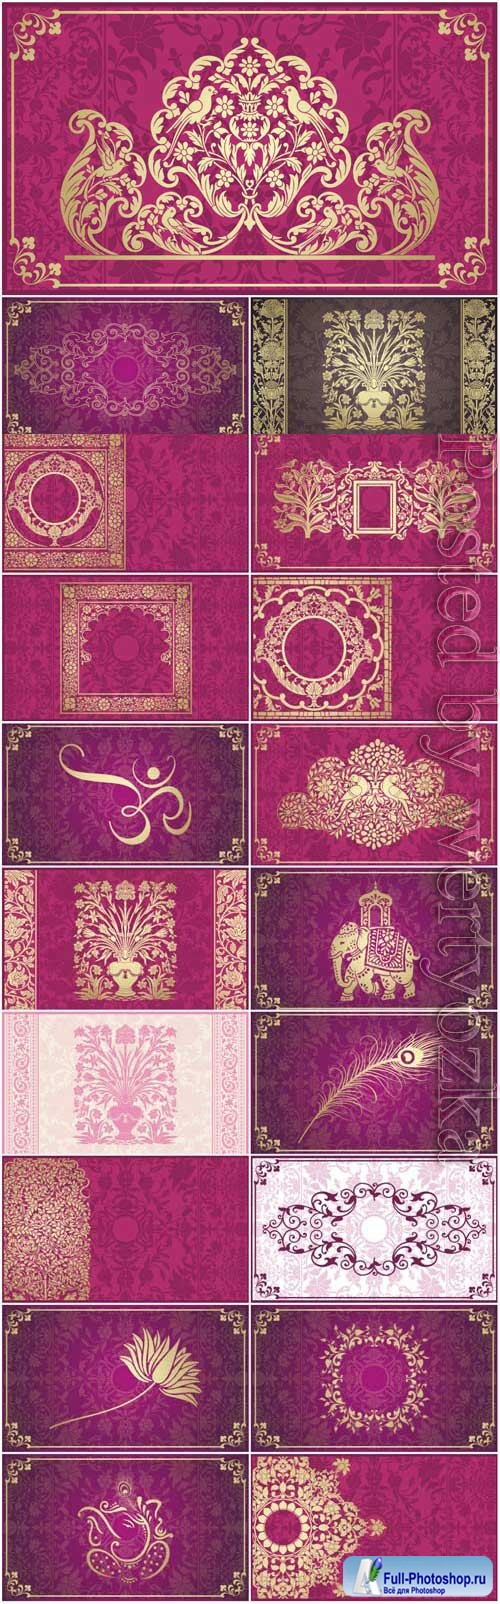 Pink indian backgrounds with gold ornaments in vector